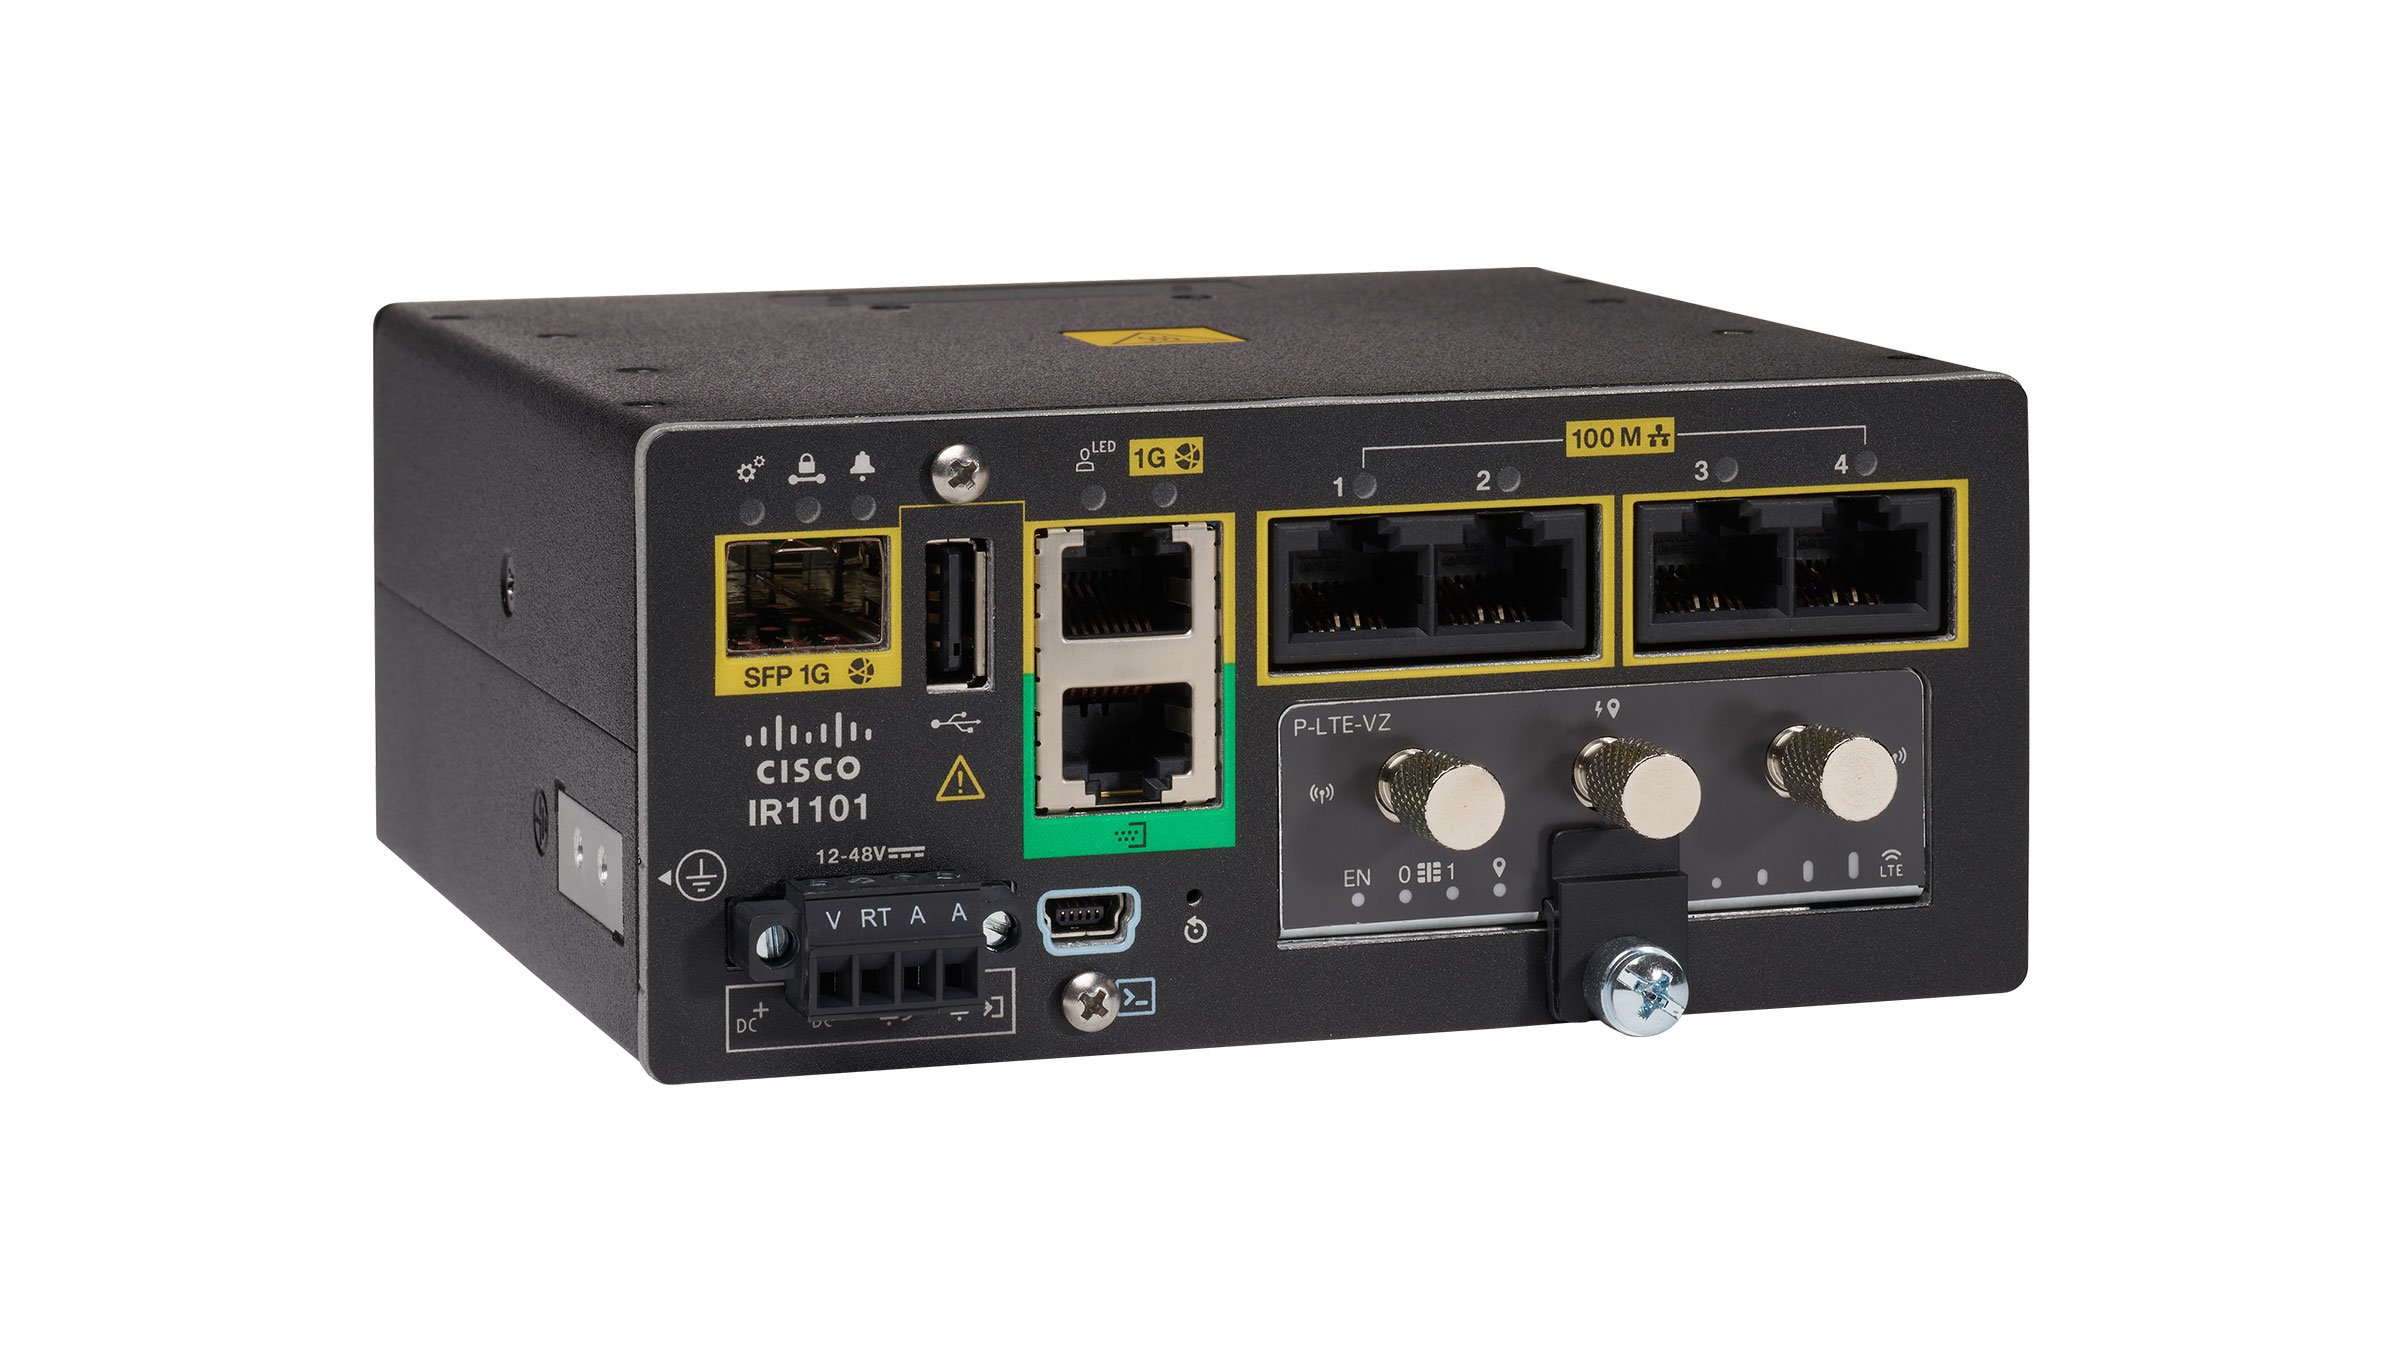 Cisco Catalyst IR1101 Rugged Series Routers